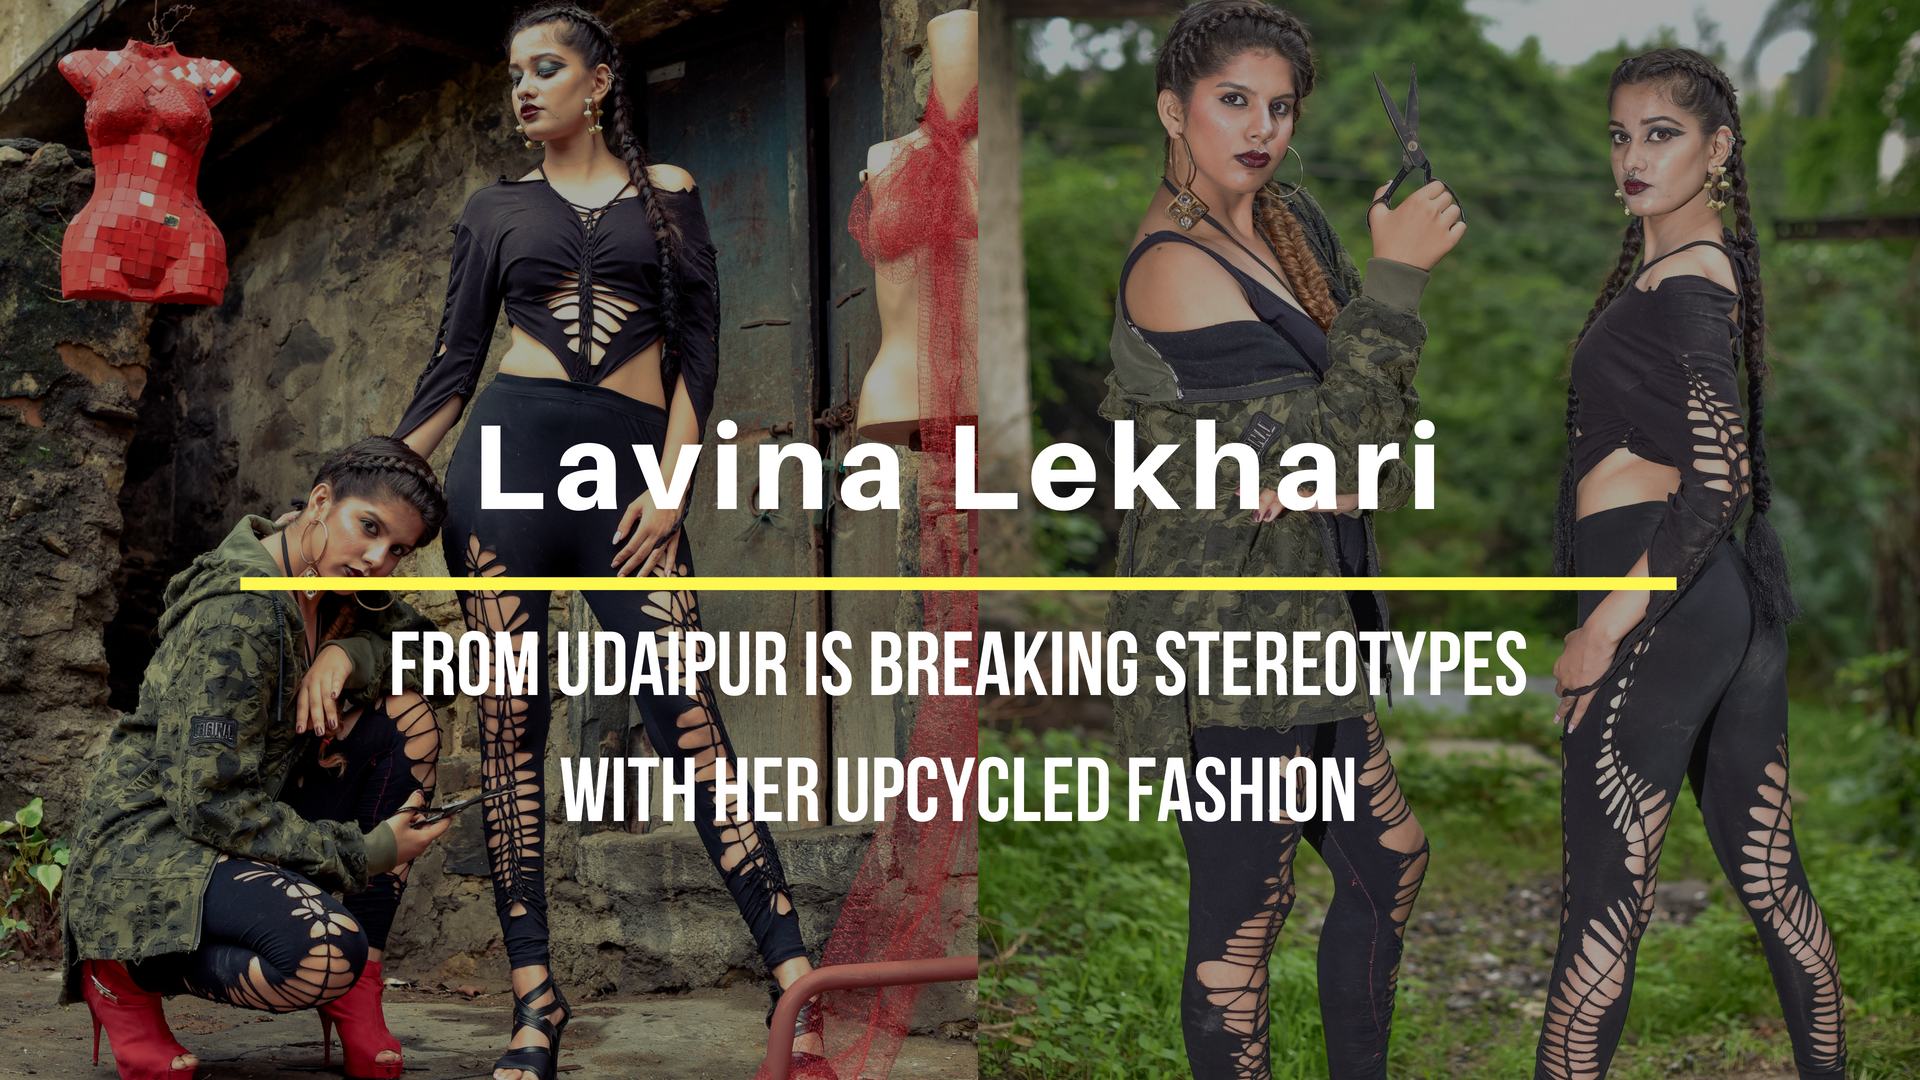 Lavina Lekhari From Udaipur Is Breaking Stereotypes with Her Upcycled Fashion | People of Udaipur